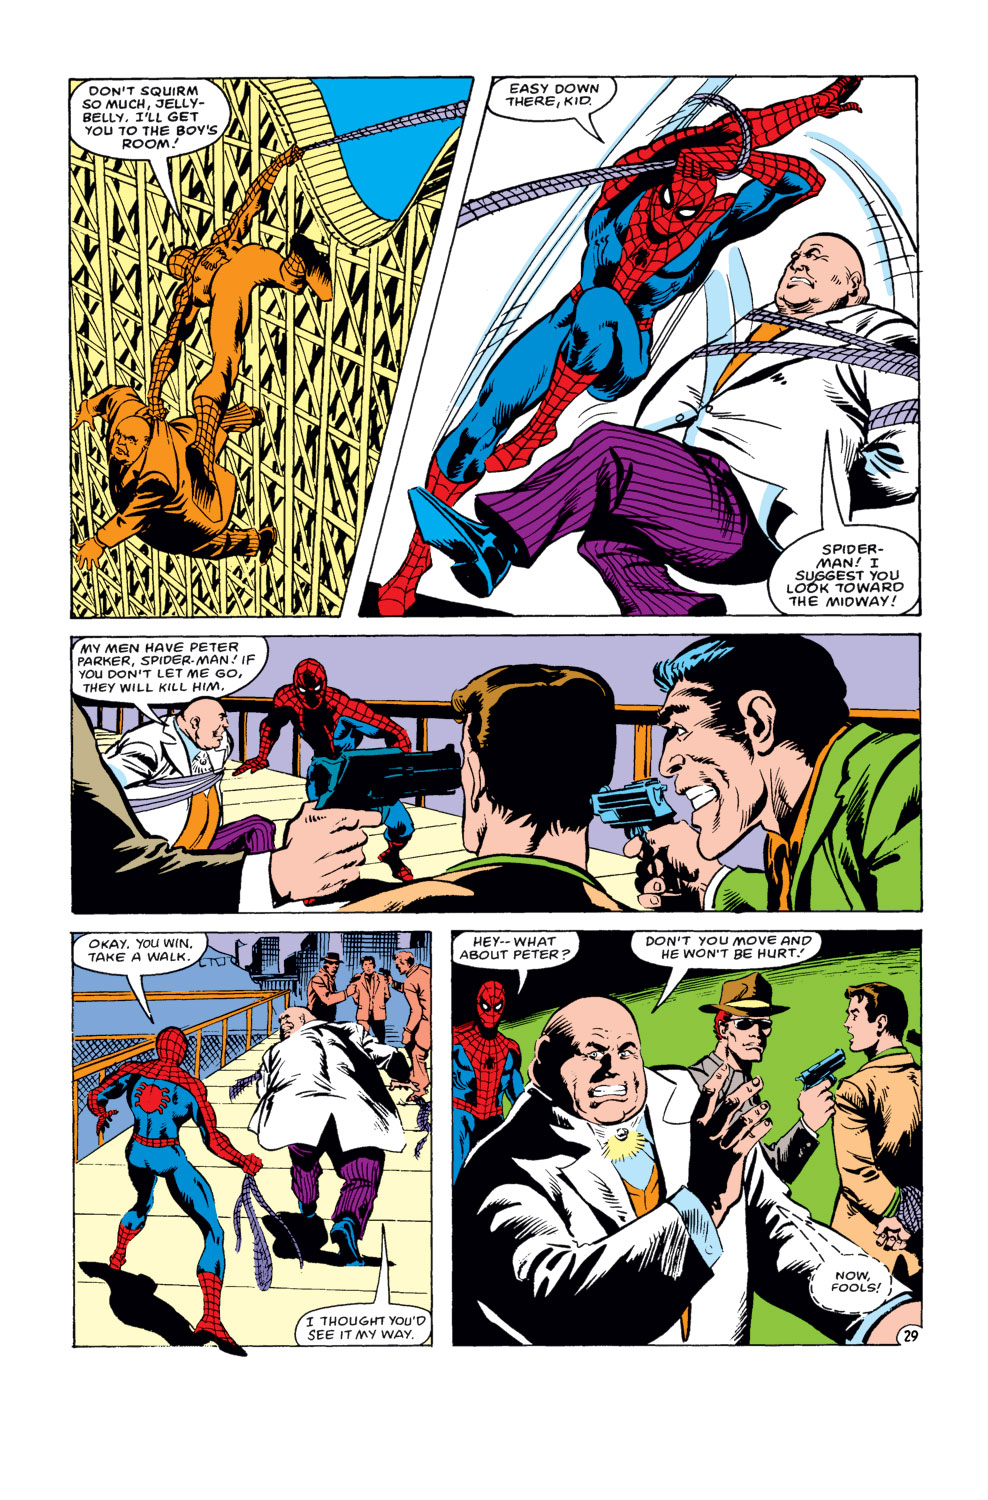 What If? (1977) issue 30 - Spider-Man's clone lived - Page 30